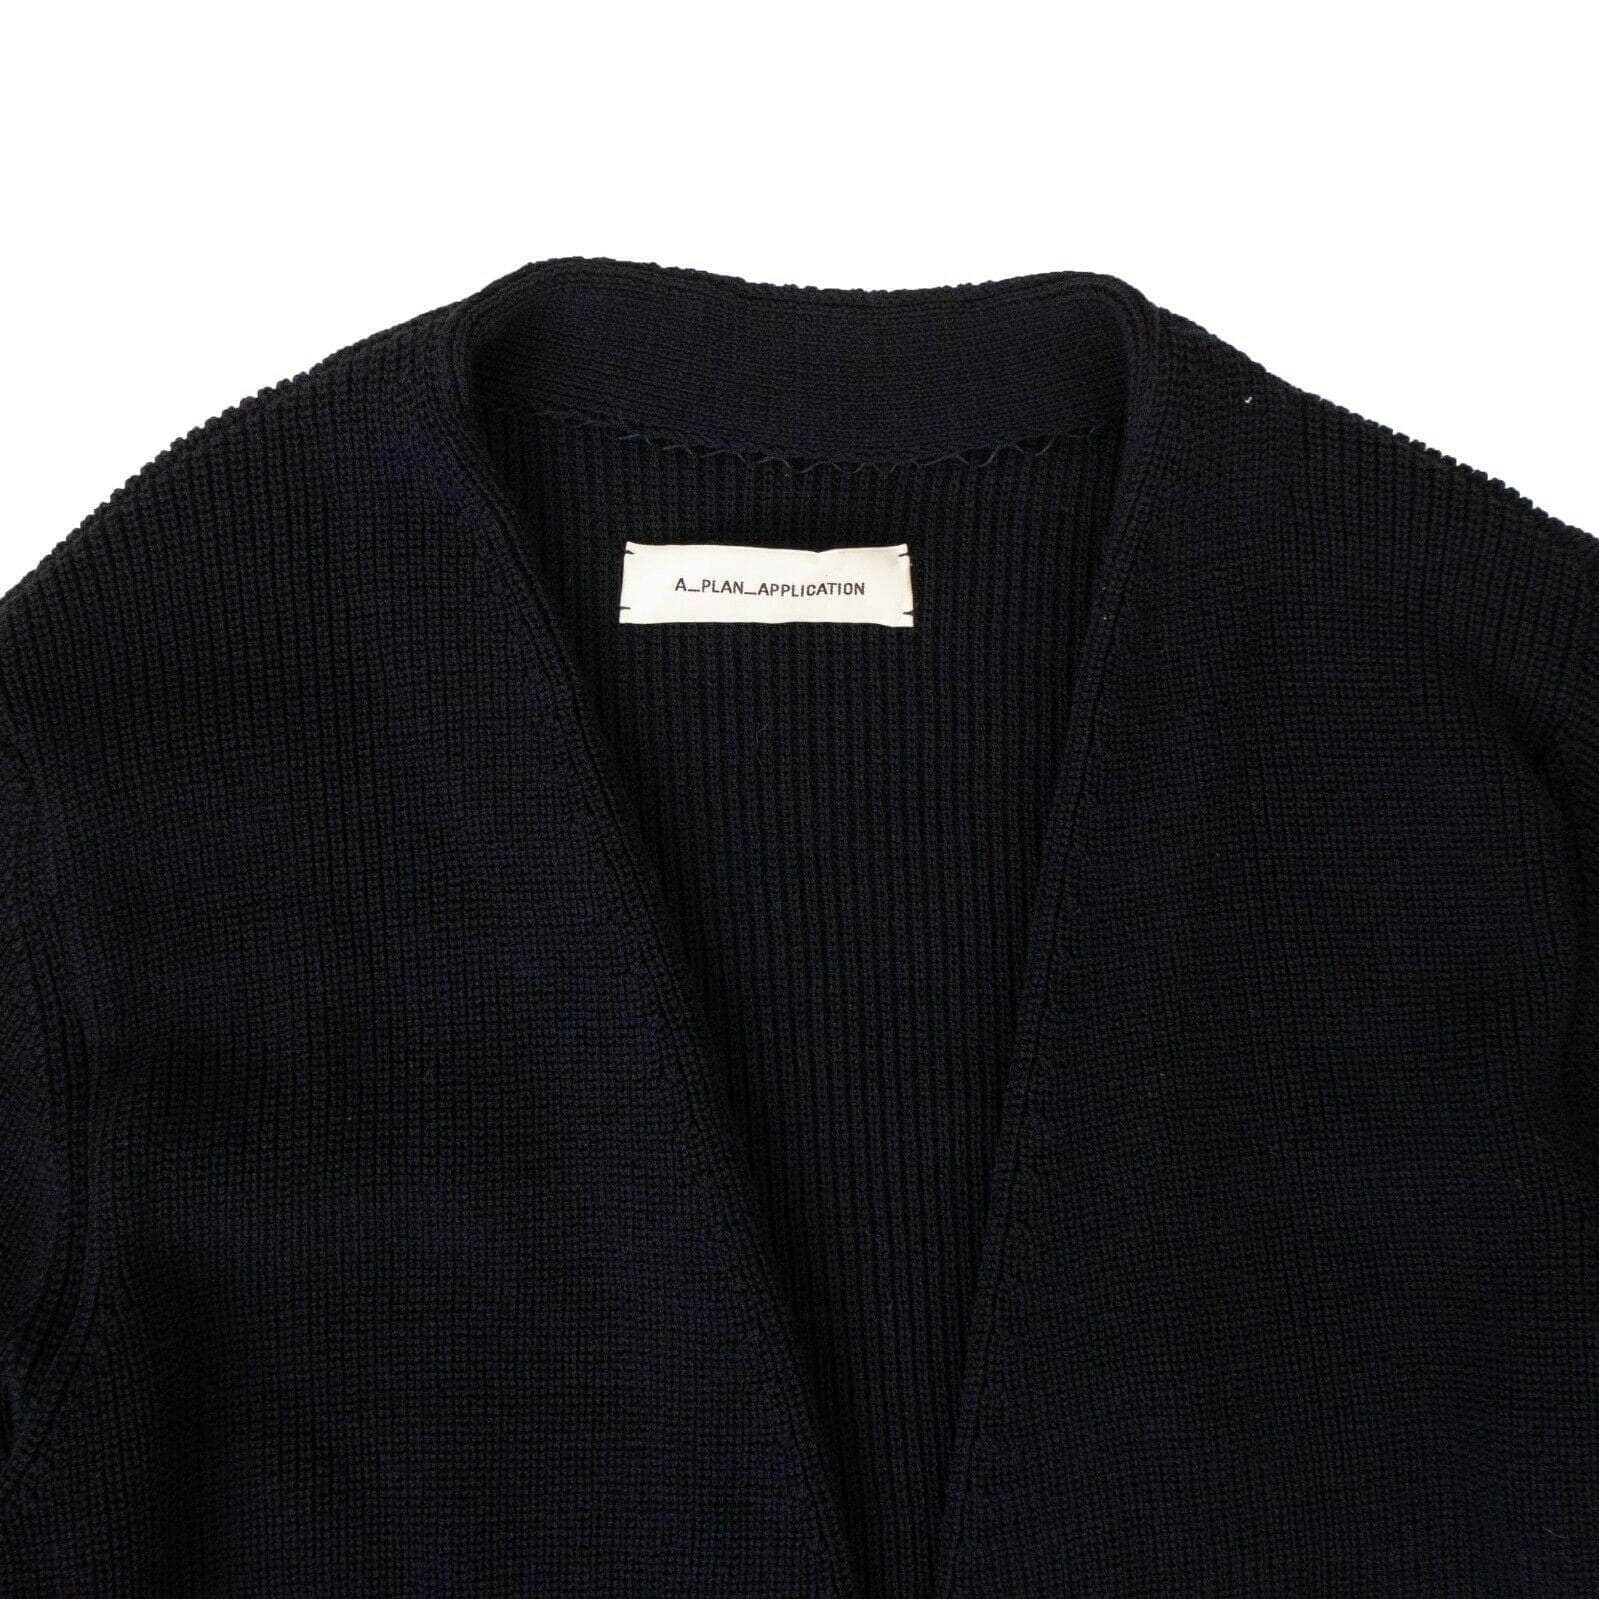 A_PLAN_APPLICATION 250-500, a_plan_application, channelenable-all, couponcollection, gender-womens, main-clothing, size-s, womens-cardigans S Navy Blue Knit Long Cardigan 82NGG-AP-1023/S 82NGG-AP-1023/S